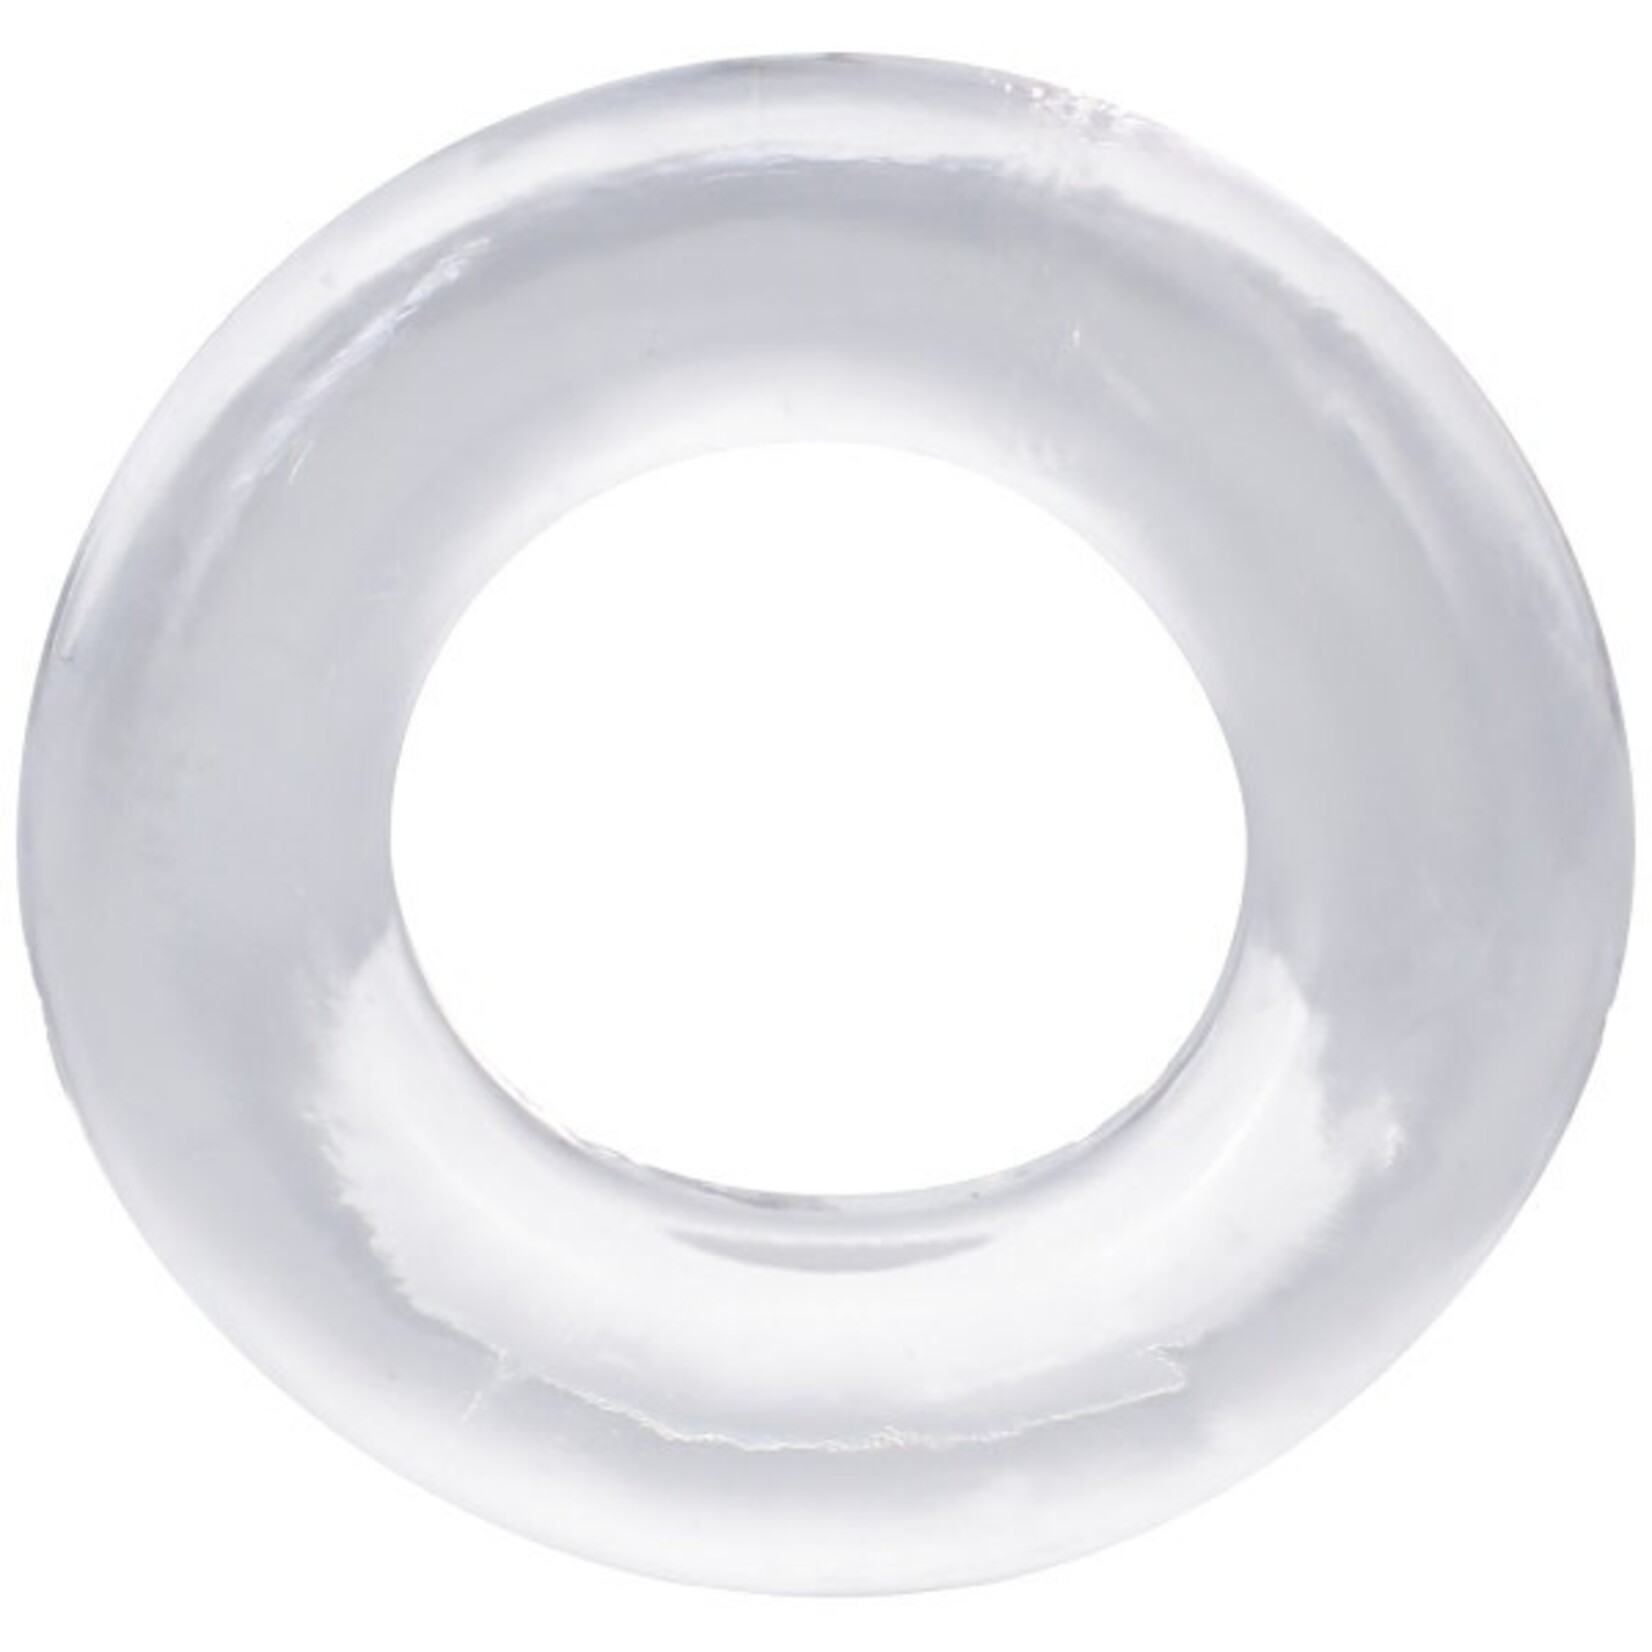 DOC JOHNSON ROCK SOLID - THE DONUT 4X - C-RING CLEAR